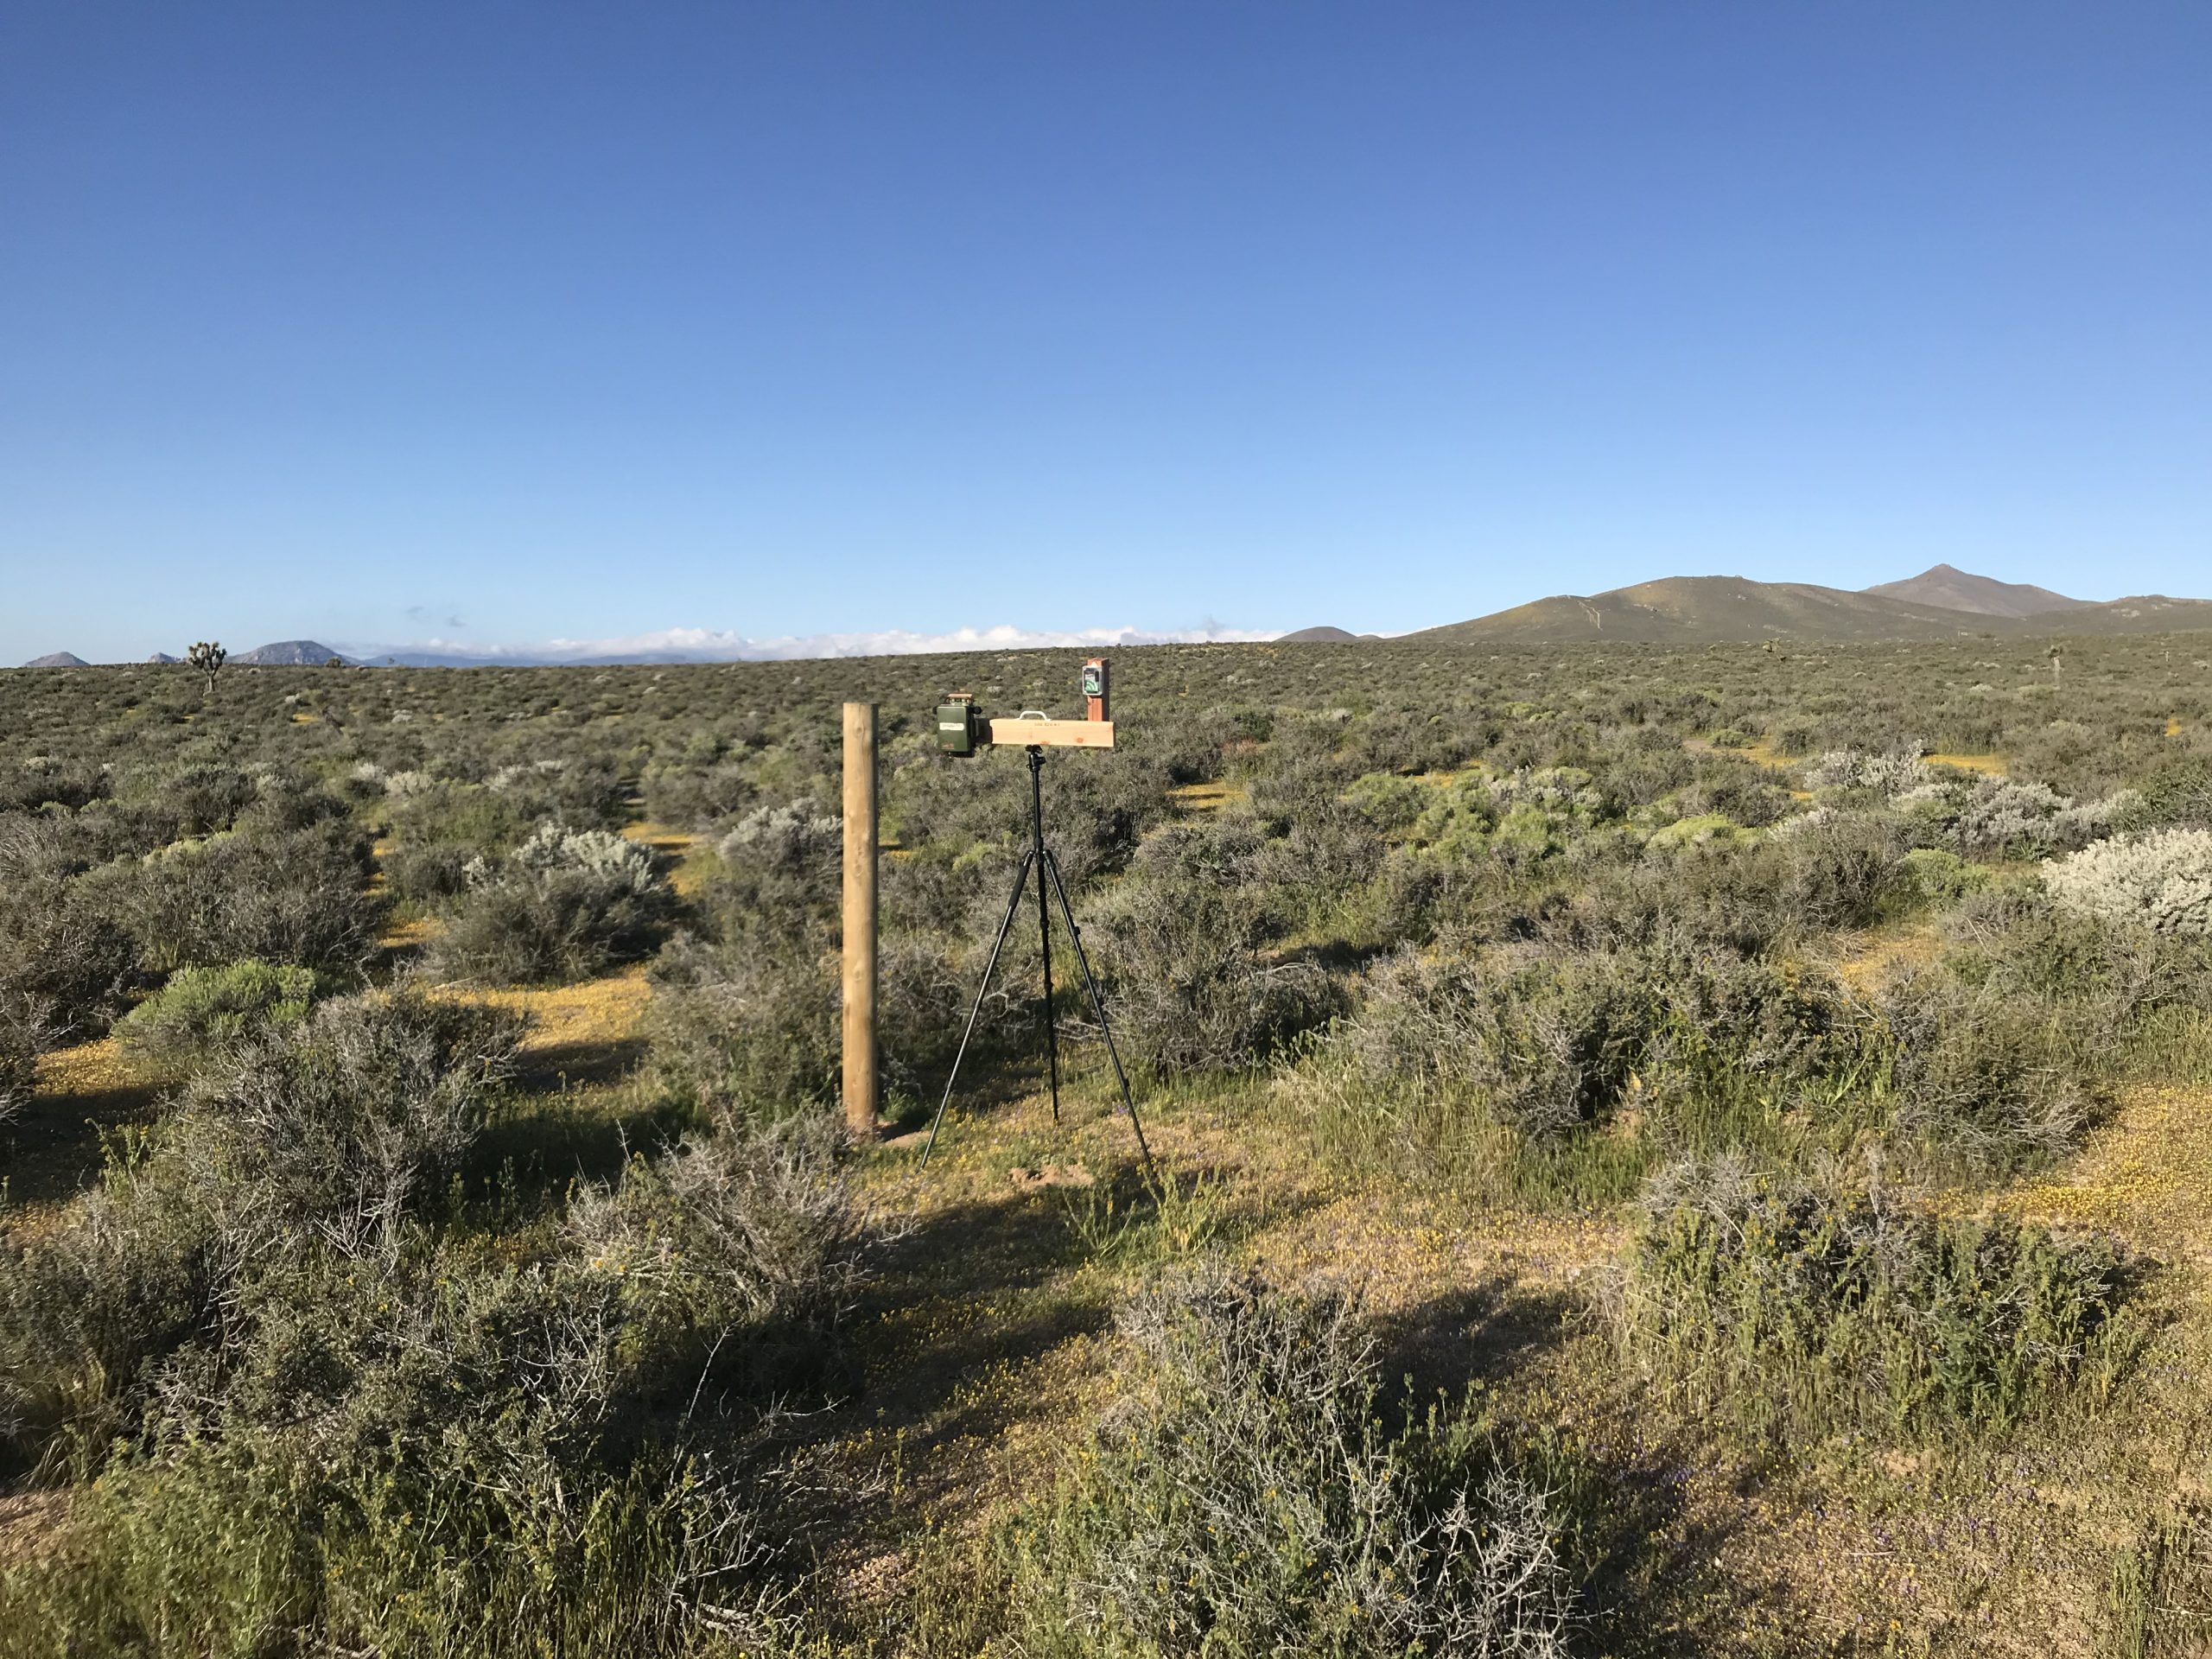 Two ARUs models deployed side by side at the Onyx Ranch State Vehicle Recreation Area outside of Bakersfield, CA. Photo courtesy of Shane Emerson/California State Parks.